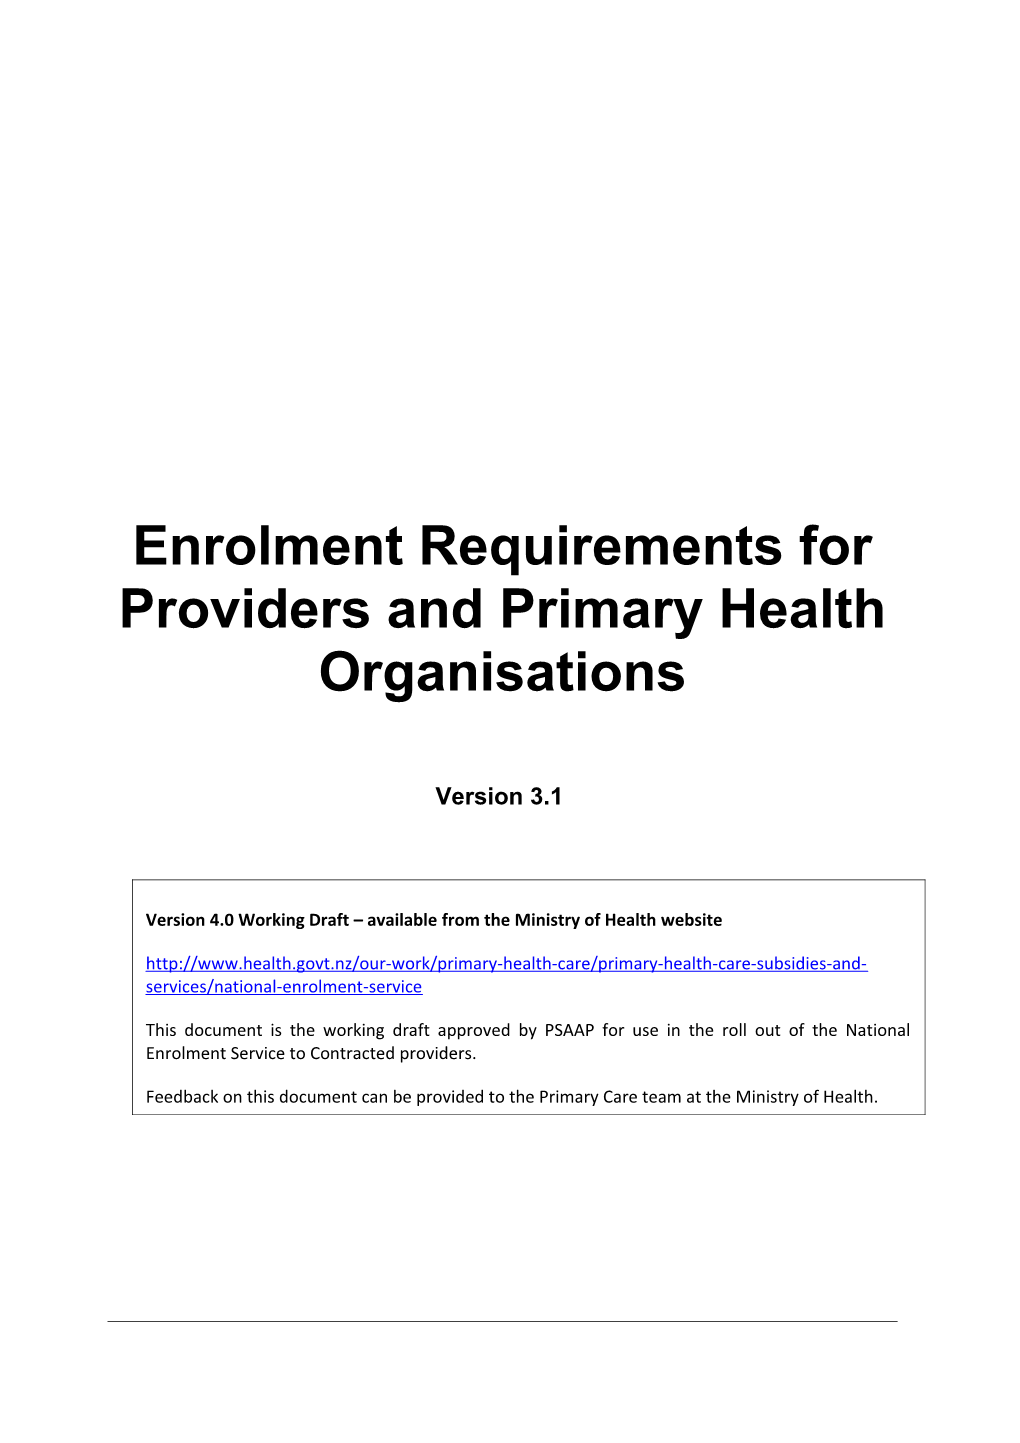 Enrolment Requirements for Providers and Primary Health Organisations